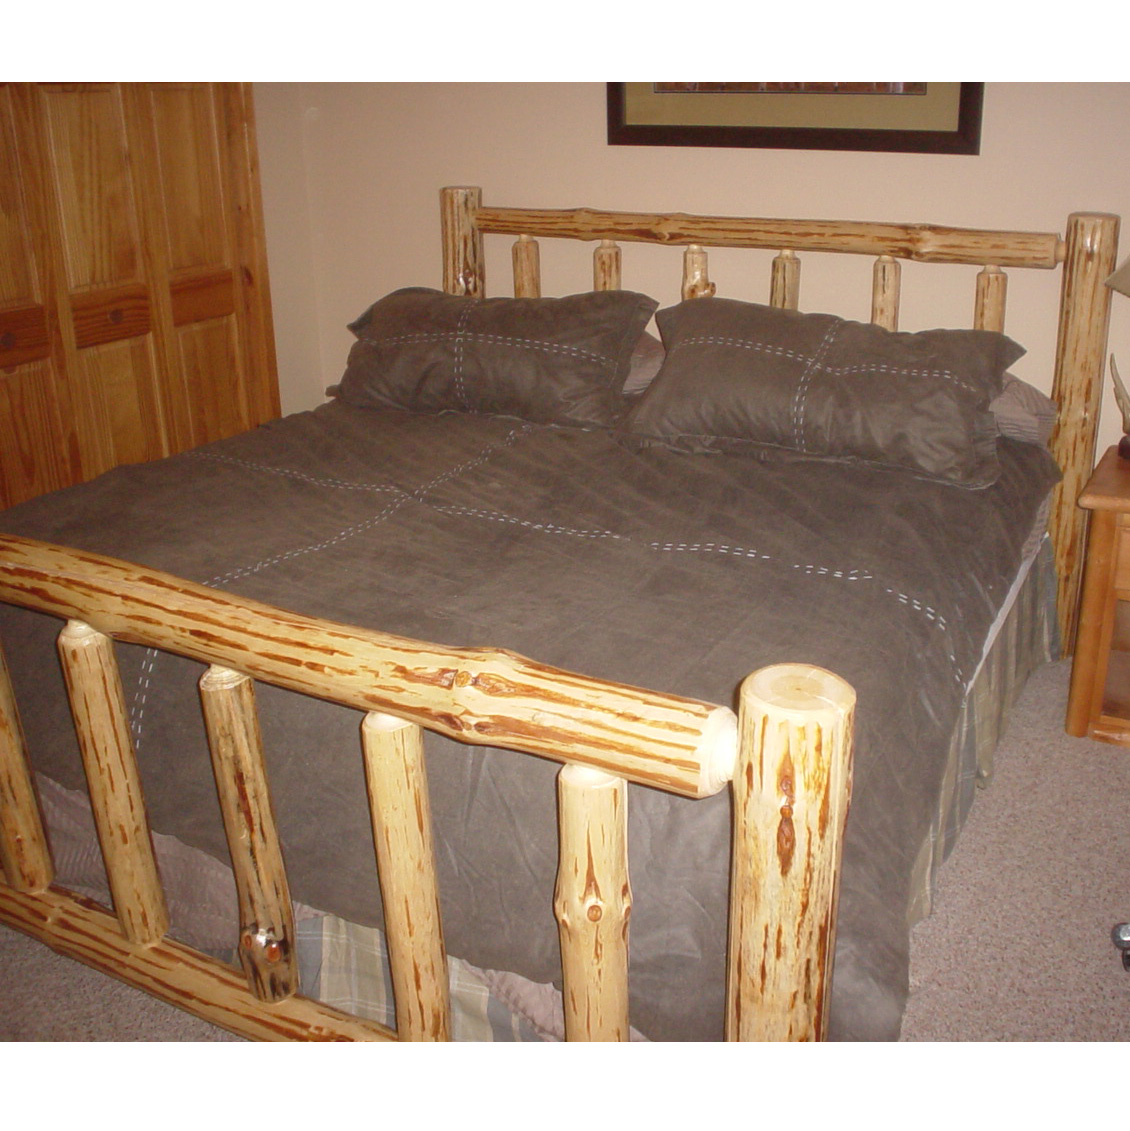 Pine Log Queen Size Bed Frame K A Log Furniture Construction,Gin Rummy Card Game Online